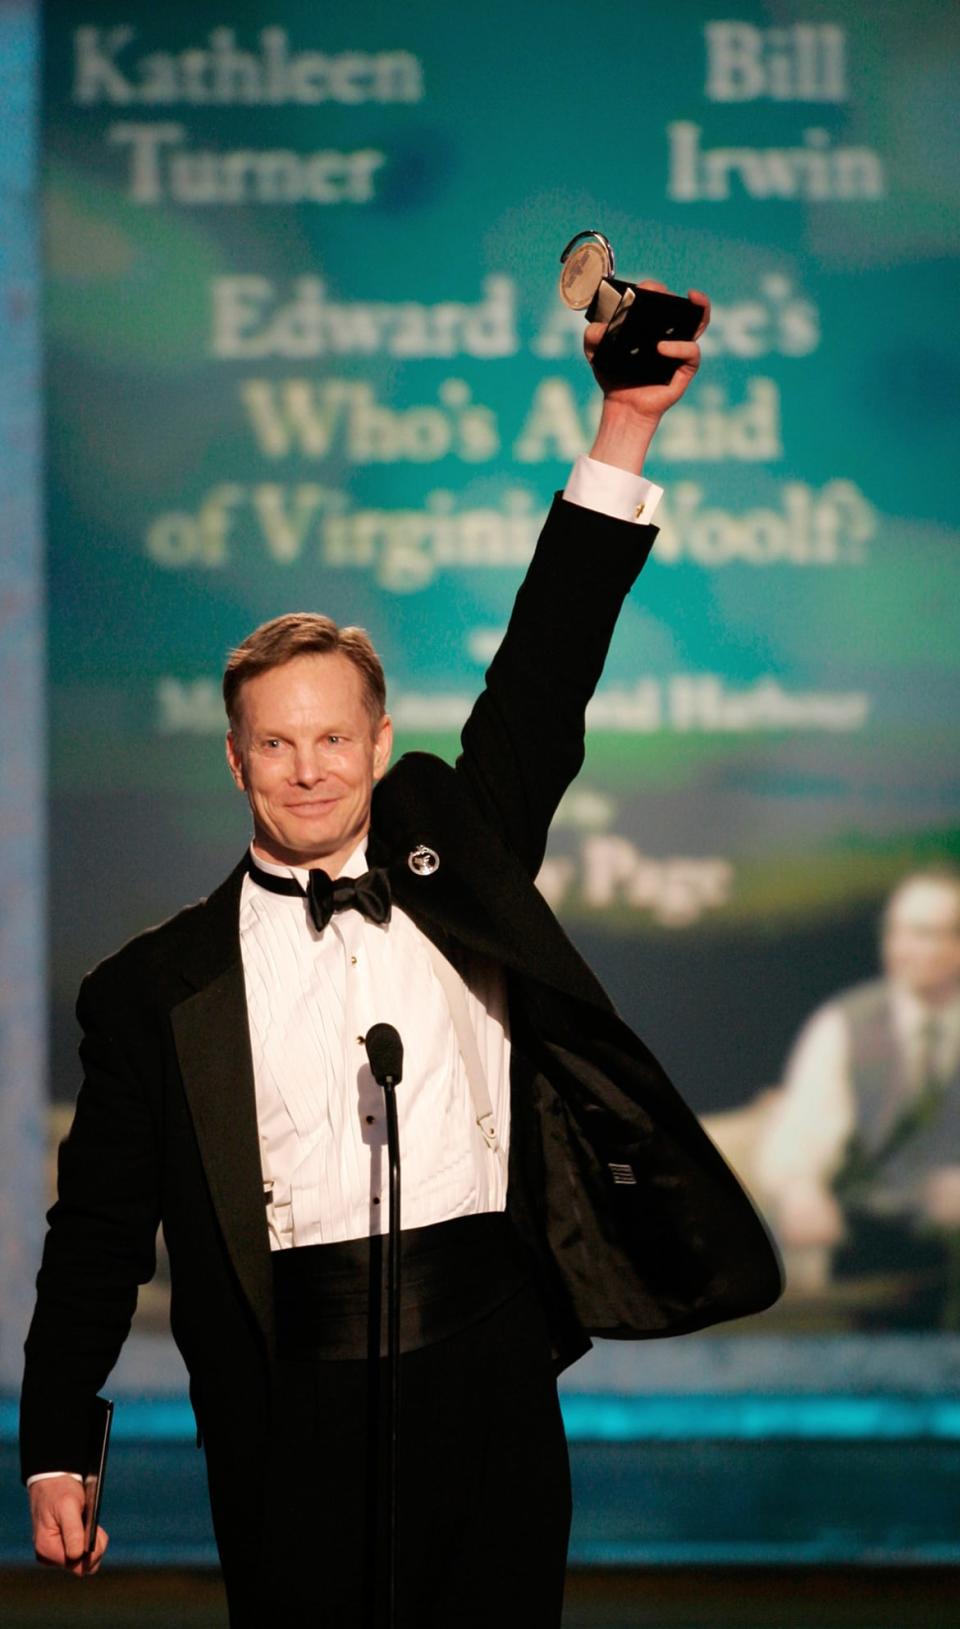 <div class="inline-image__caption"><p>Bill Irwin accepts the 2005 Tony Award for Best Performance by a Leading Actor in a Play for Edward Albee's <em>Who's Afraid of Virginia Wol</em>f at the 59th Annual Tony Awards show at Radio City Music Hall in New York, June 5, 2005.</p></div> <div class="inline-image__credit">Jeff Christensen/Reuters</div>